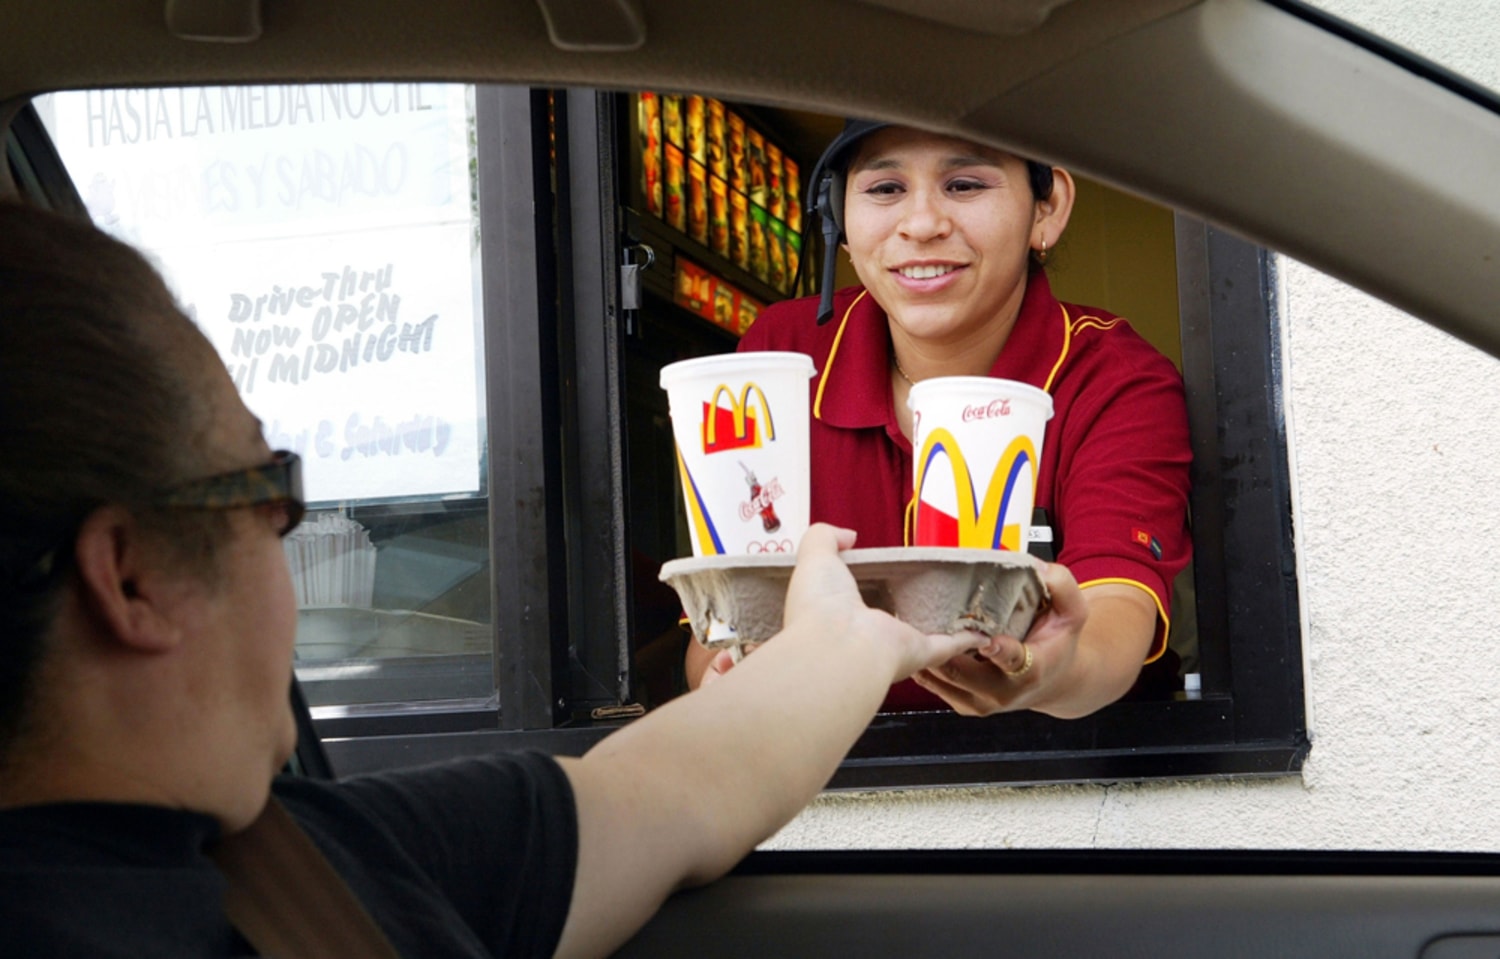 McDonald's may outsource drive-thru orders